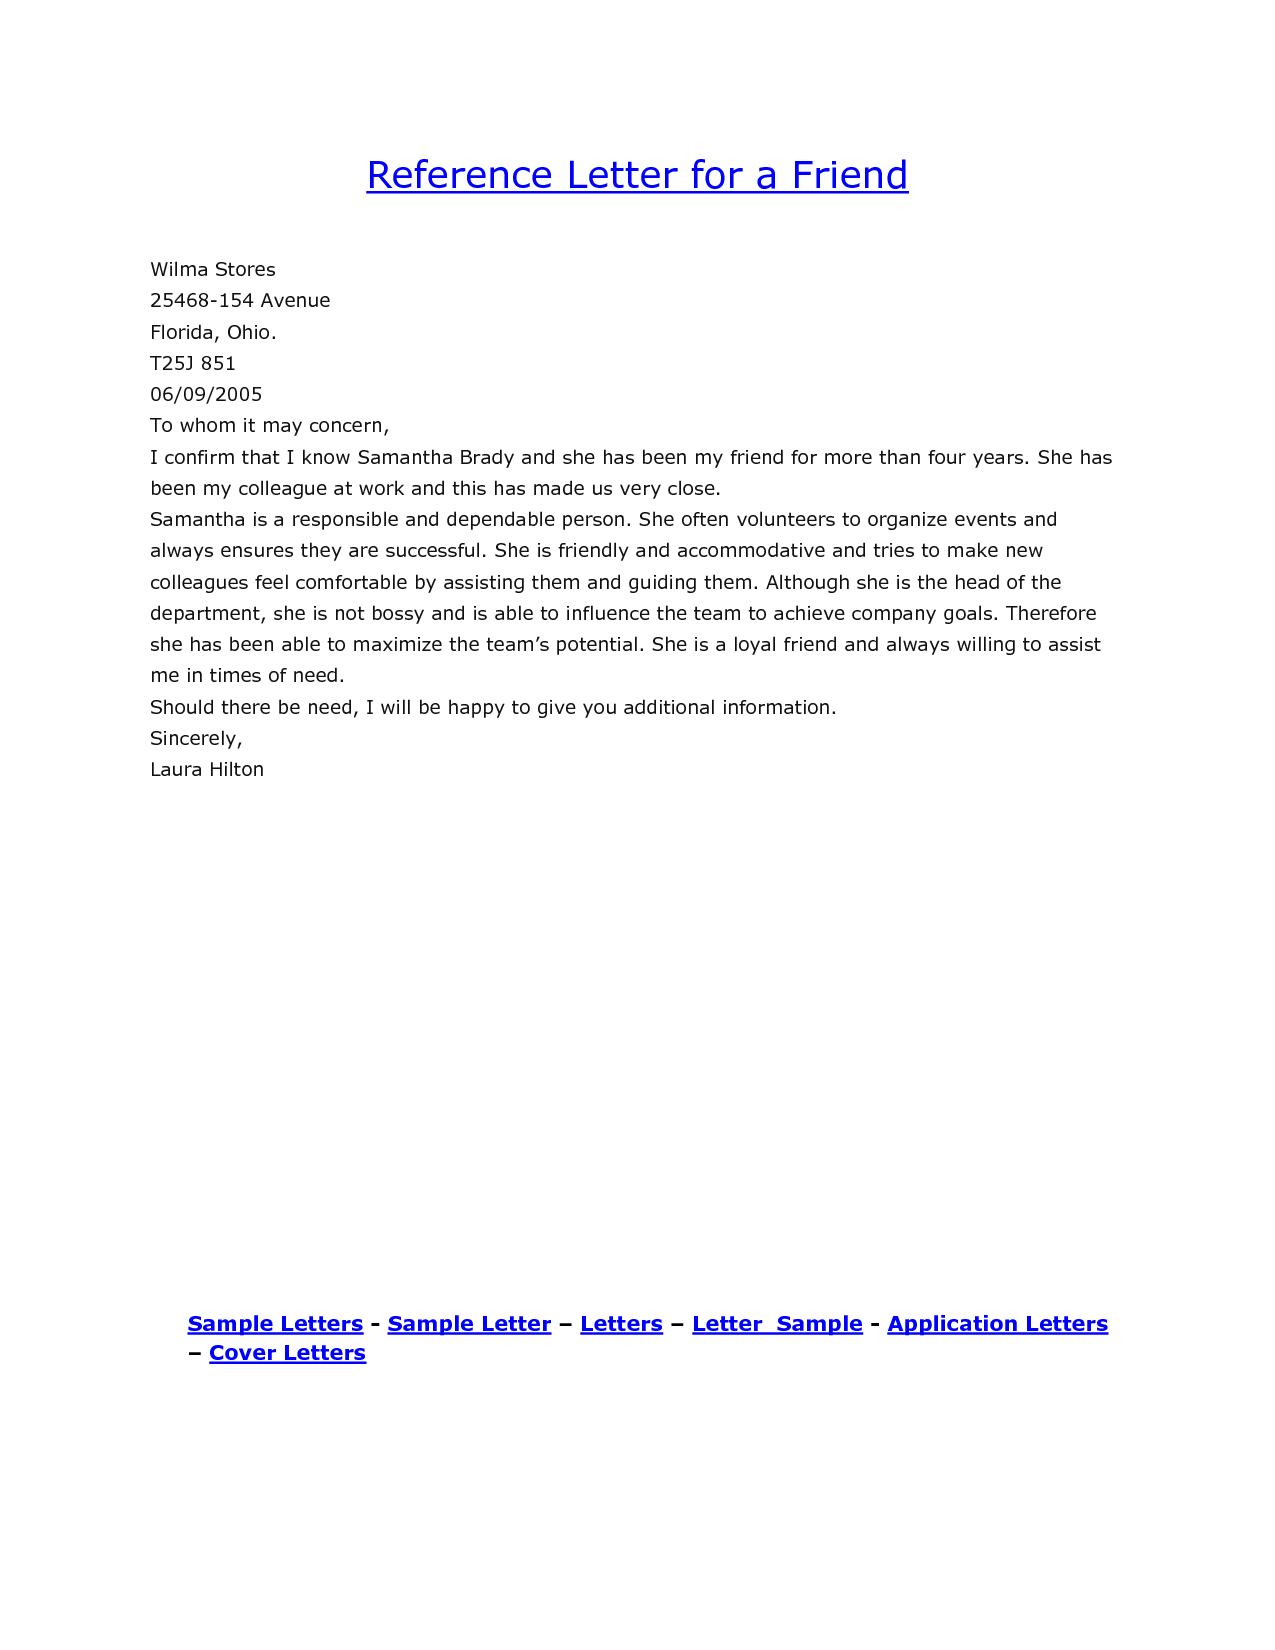 Reference Letter Sample For A Friend Yahoo Search Results with regard to dimensions 1275 X 1650